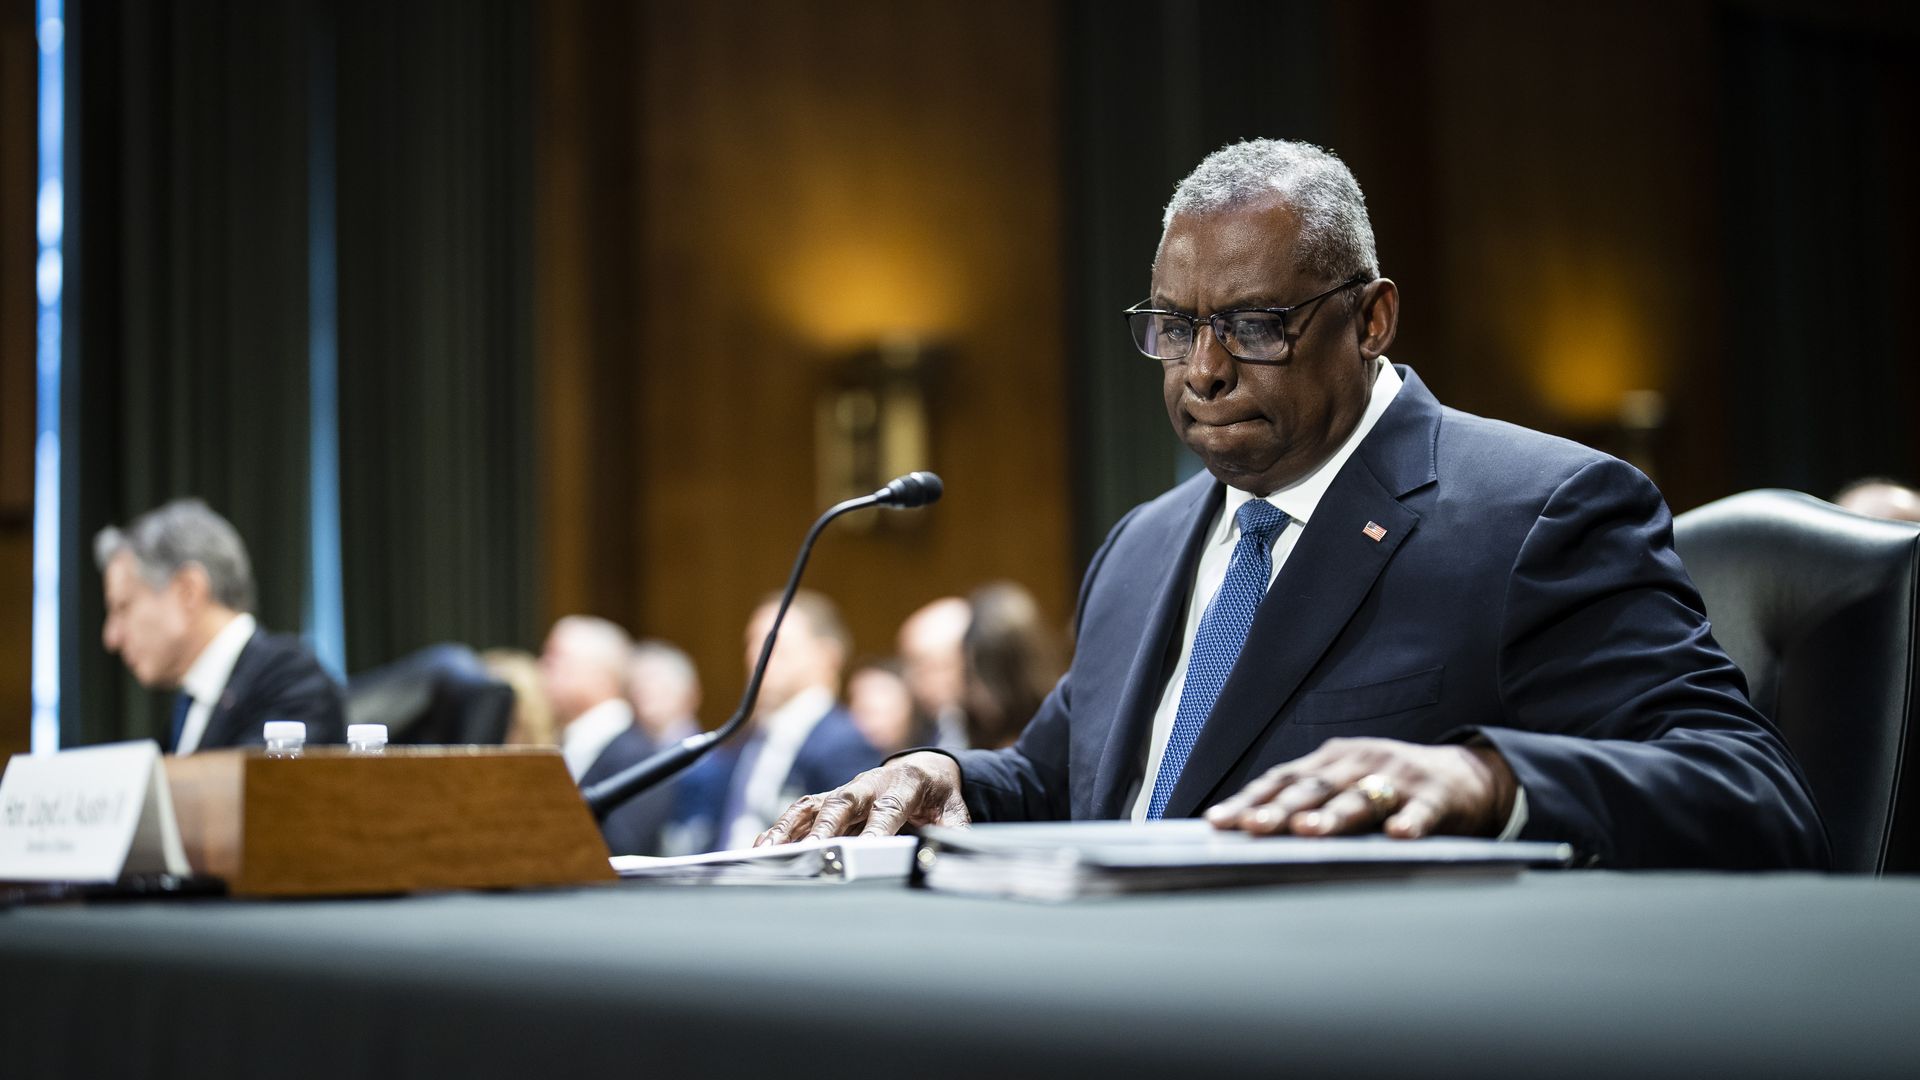 Defense Secretary Lloyd Austin, wearing a blue suit, white shirt and blue tie, testifies to a Senate committee.